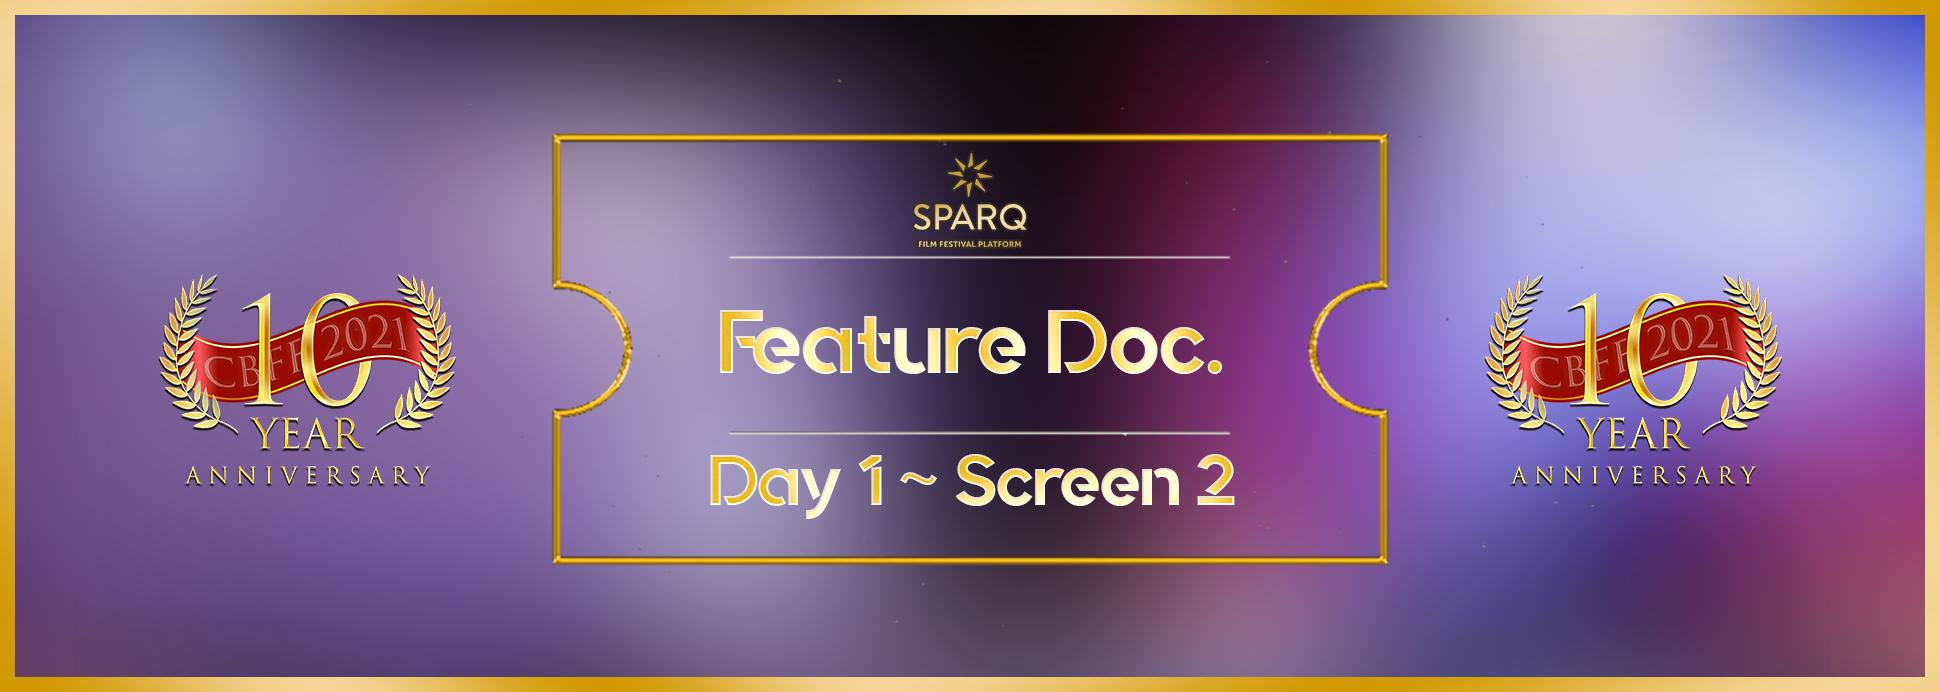 Day 1, Screen 2: Feature Doc.